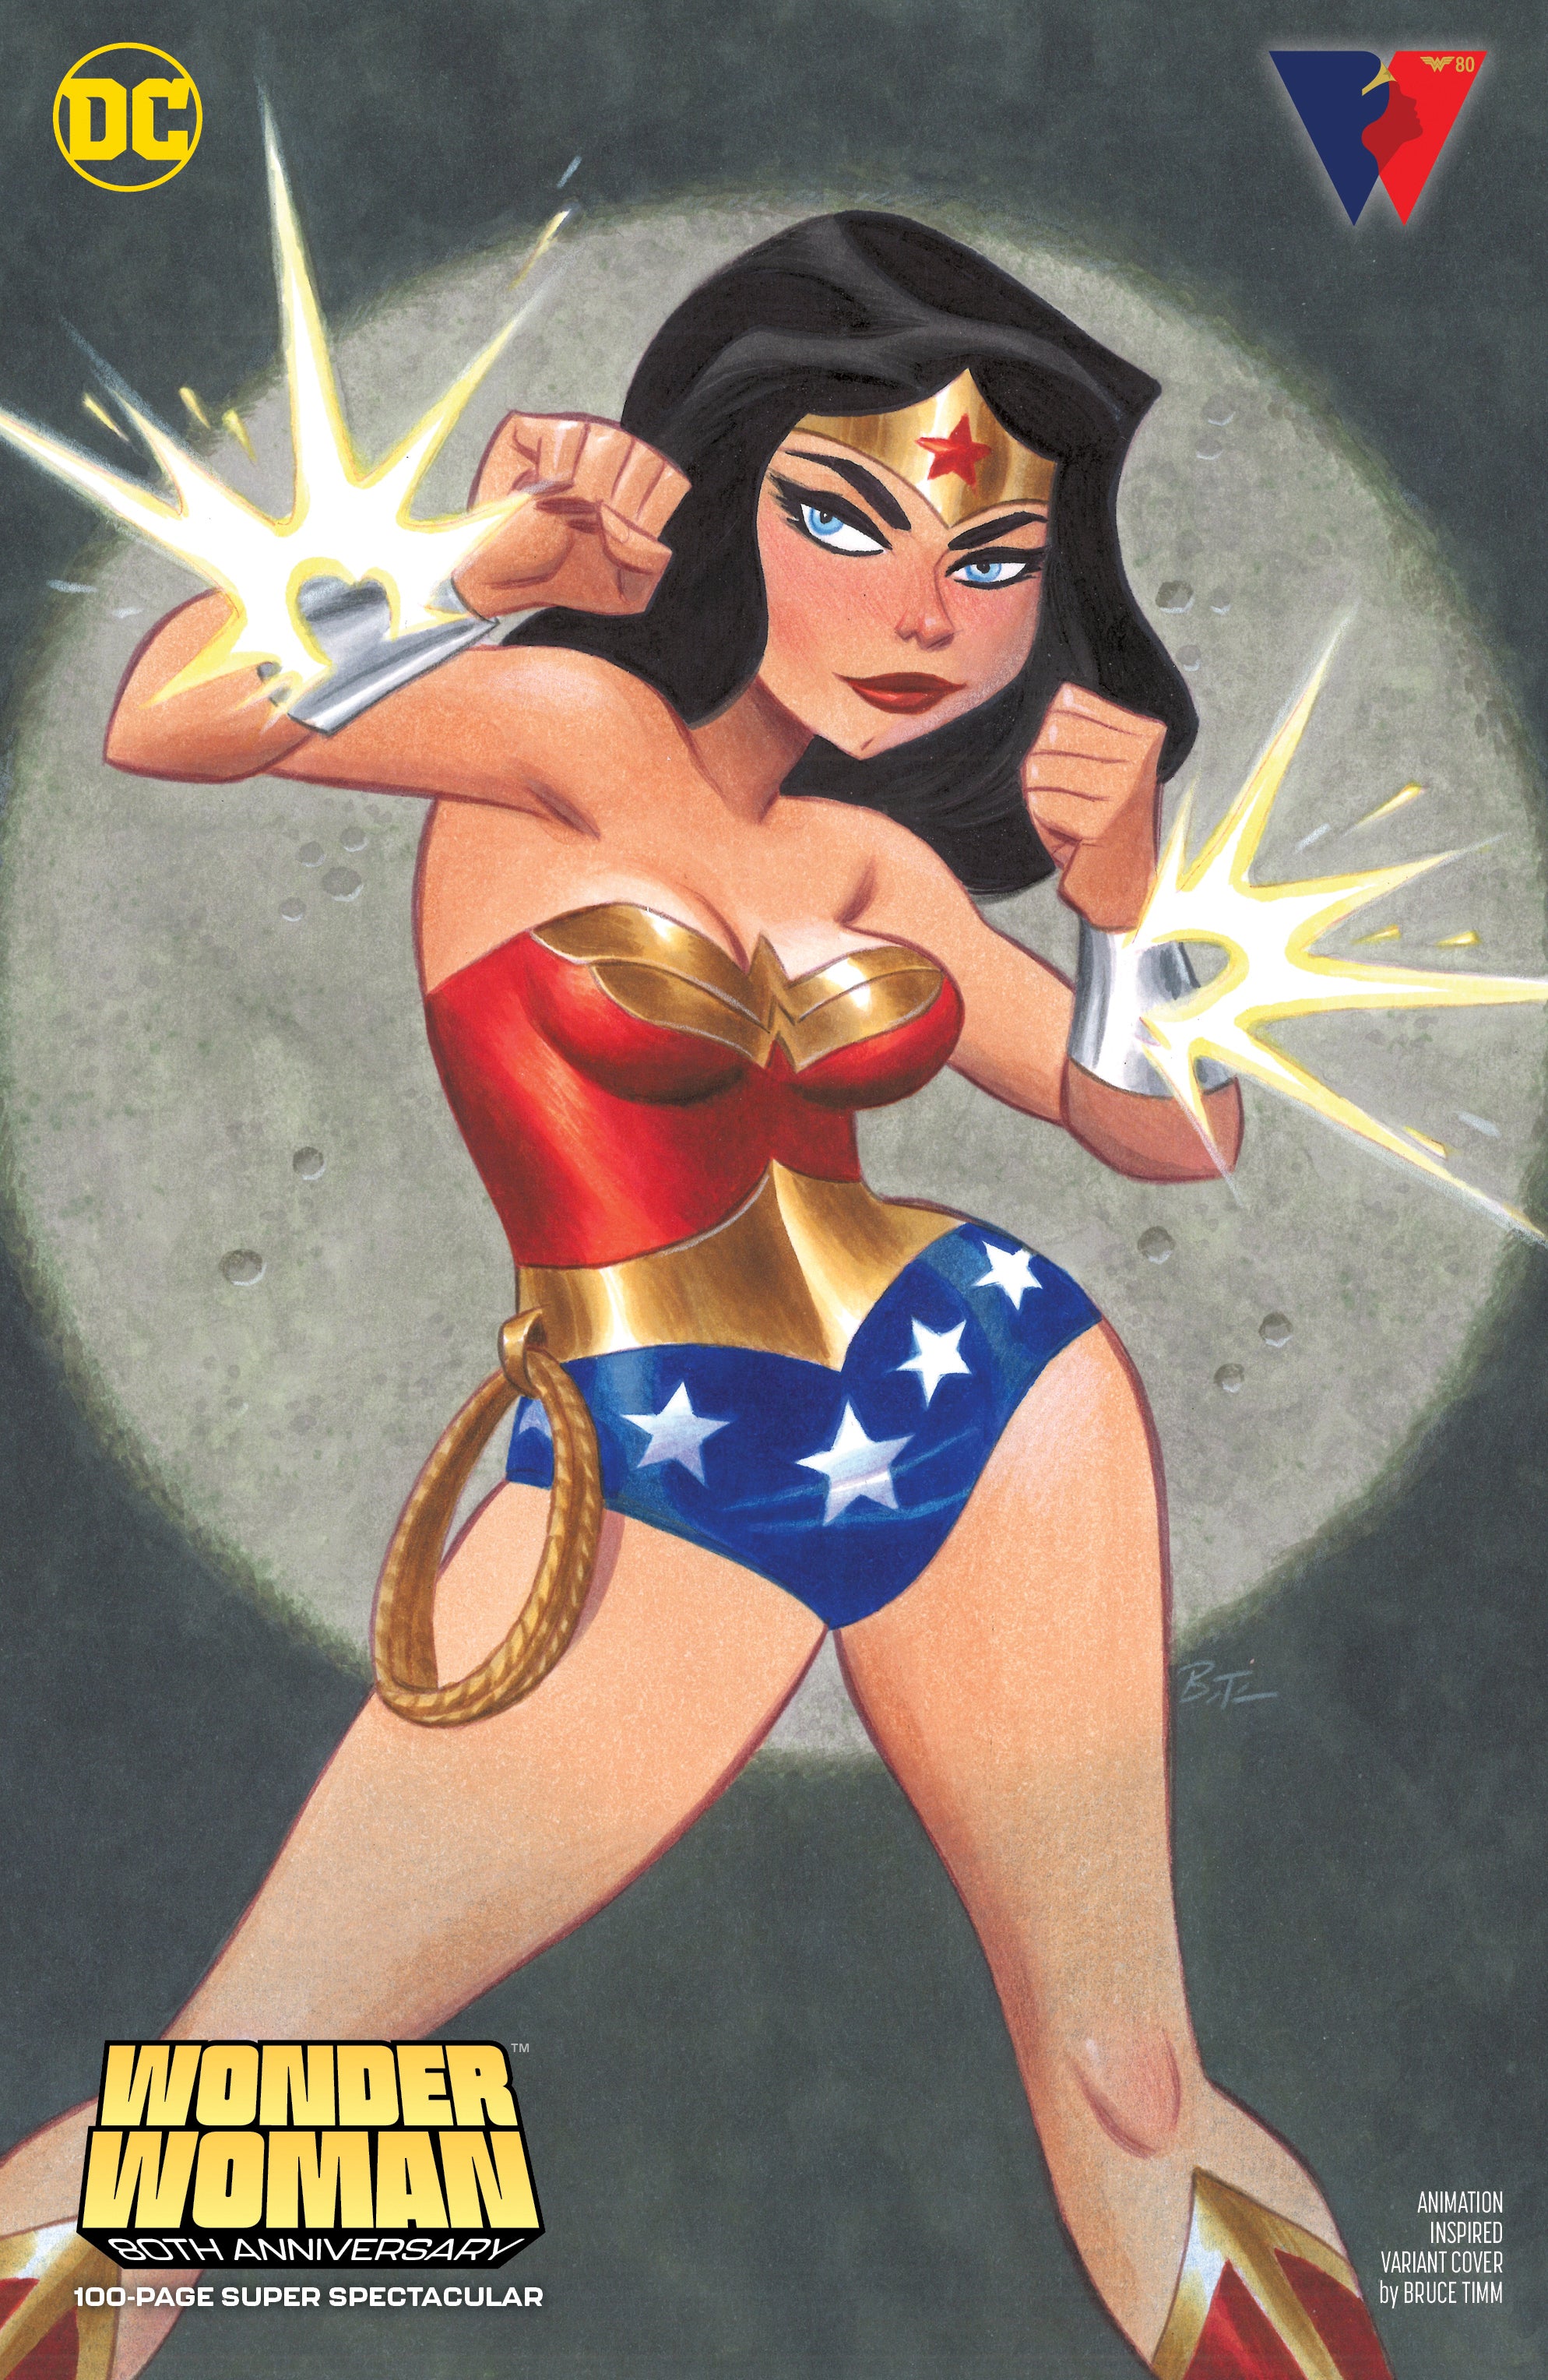 WONDER WOMAN 80TH ANNIVERSARY 100-PAGE SUPER SPECTACULAR #1 (ONE SHOT) CVR D BRUCE TIMM ANIMATION INSPIRED VAR